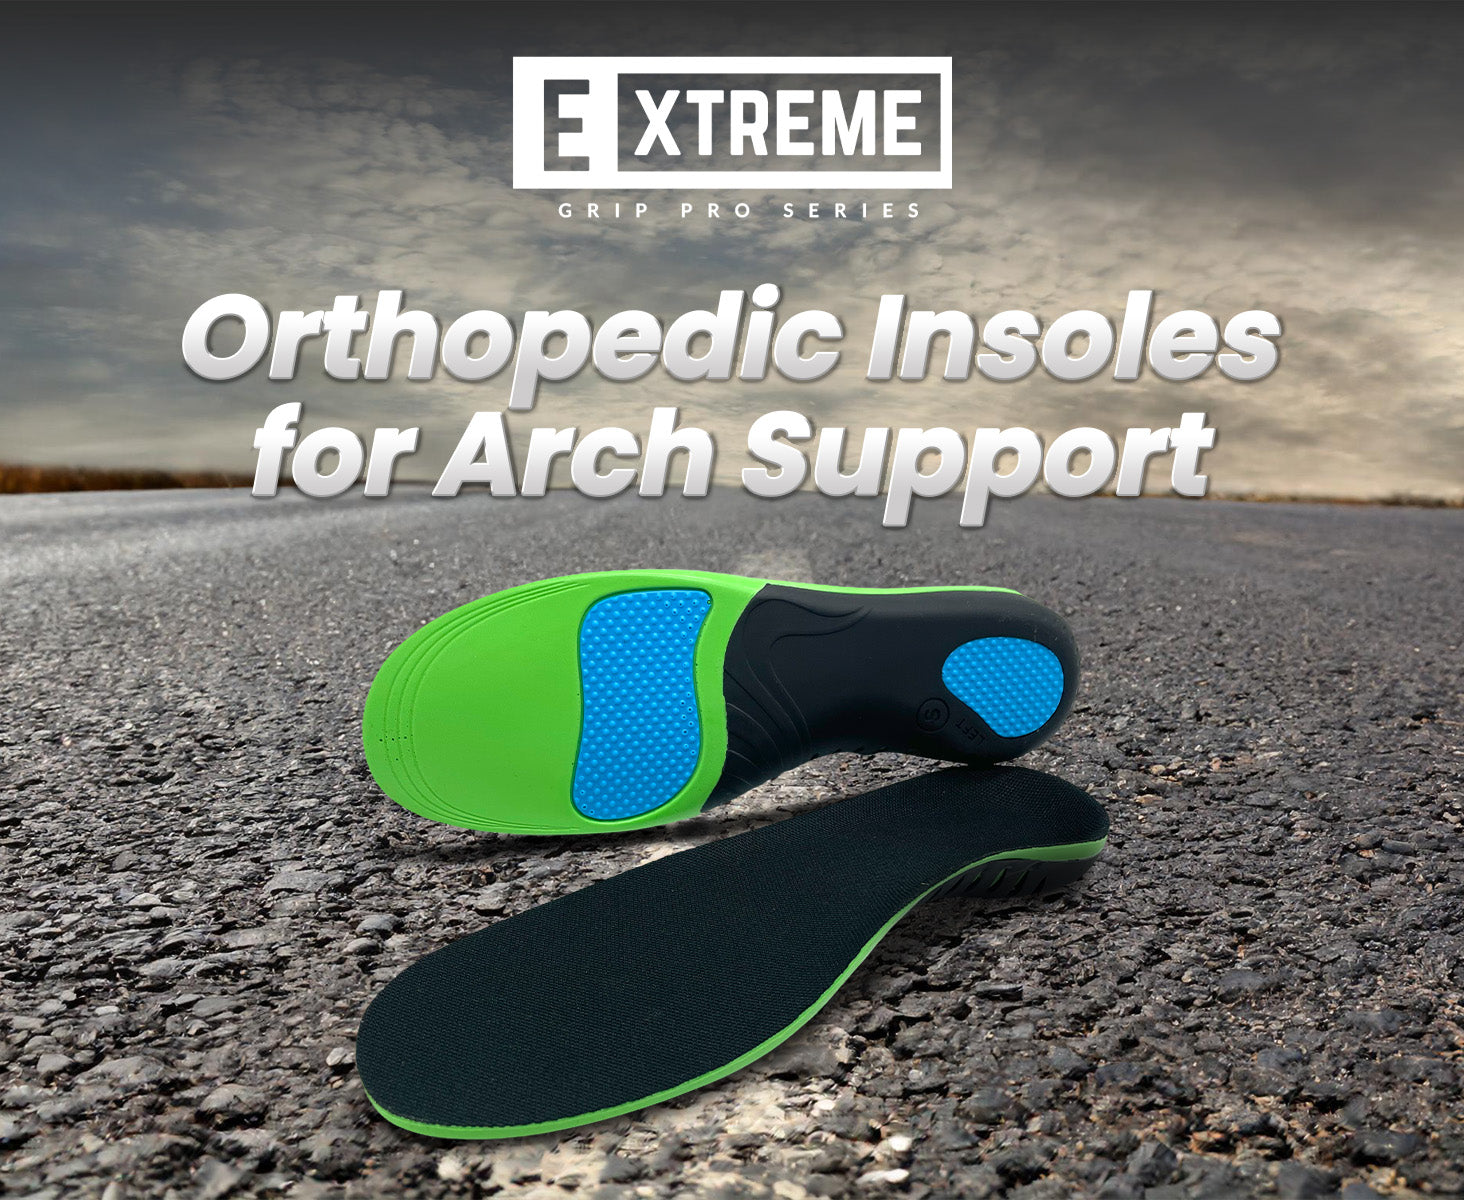 orthopedic insoles for foot pain and increased comfort adjustable and easy